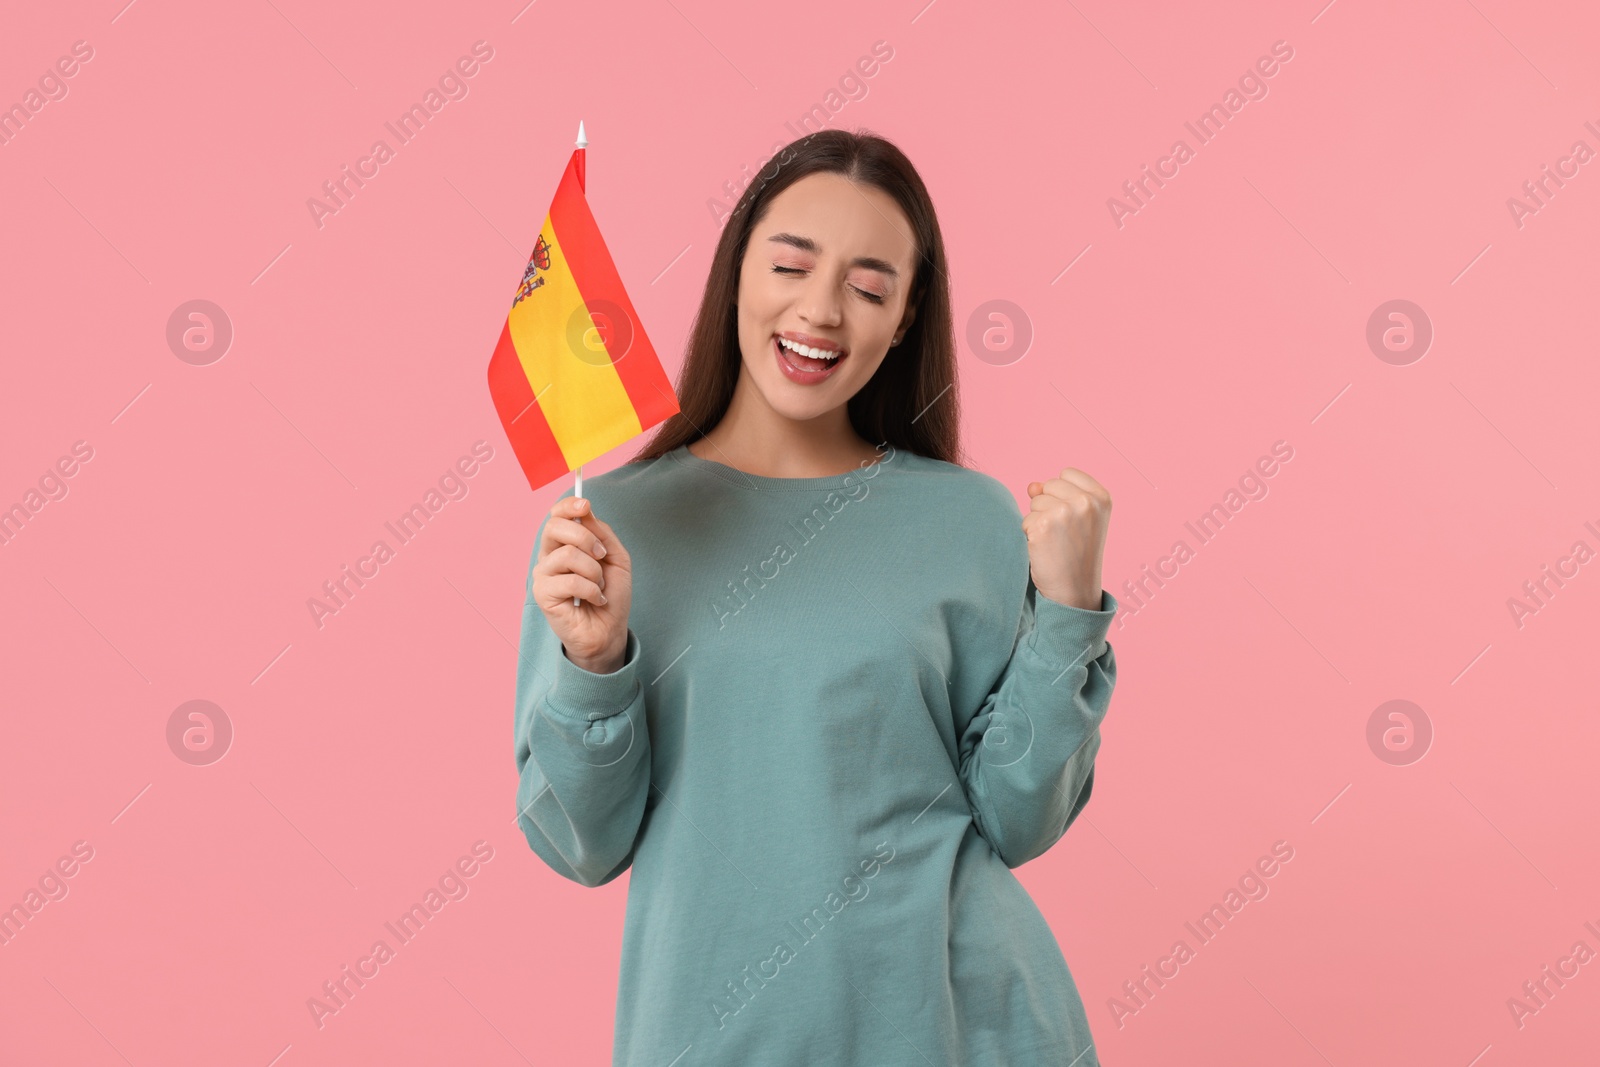 Photo of Emotional young woman holding flag of Spain on pink background